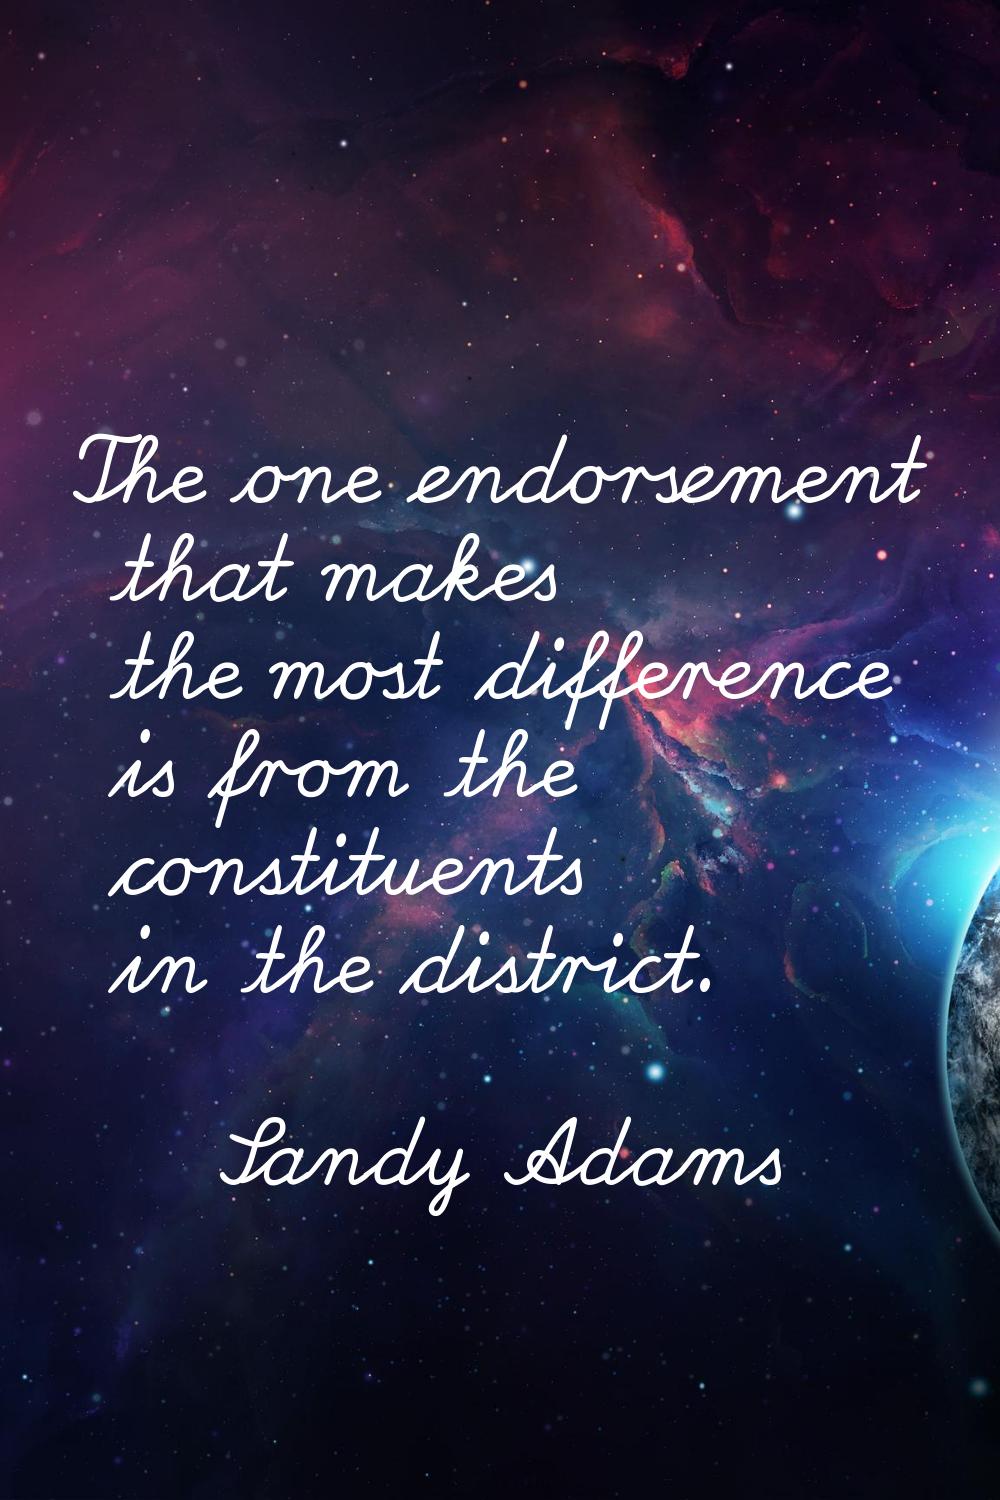 The one endorsement that makes the most difference is from the constituents in the district.